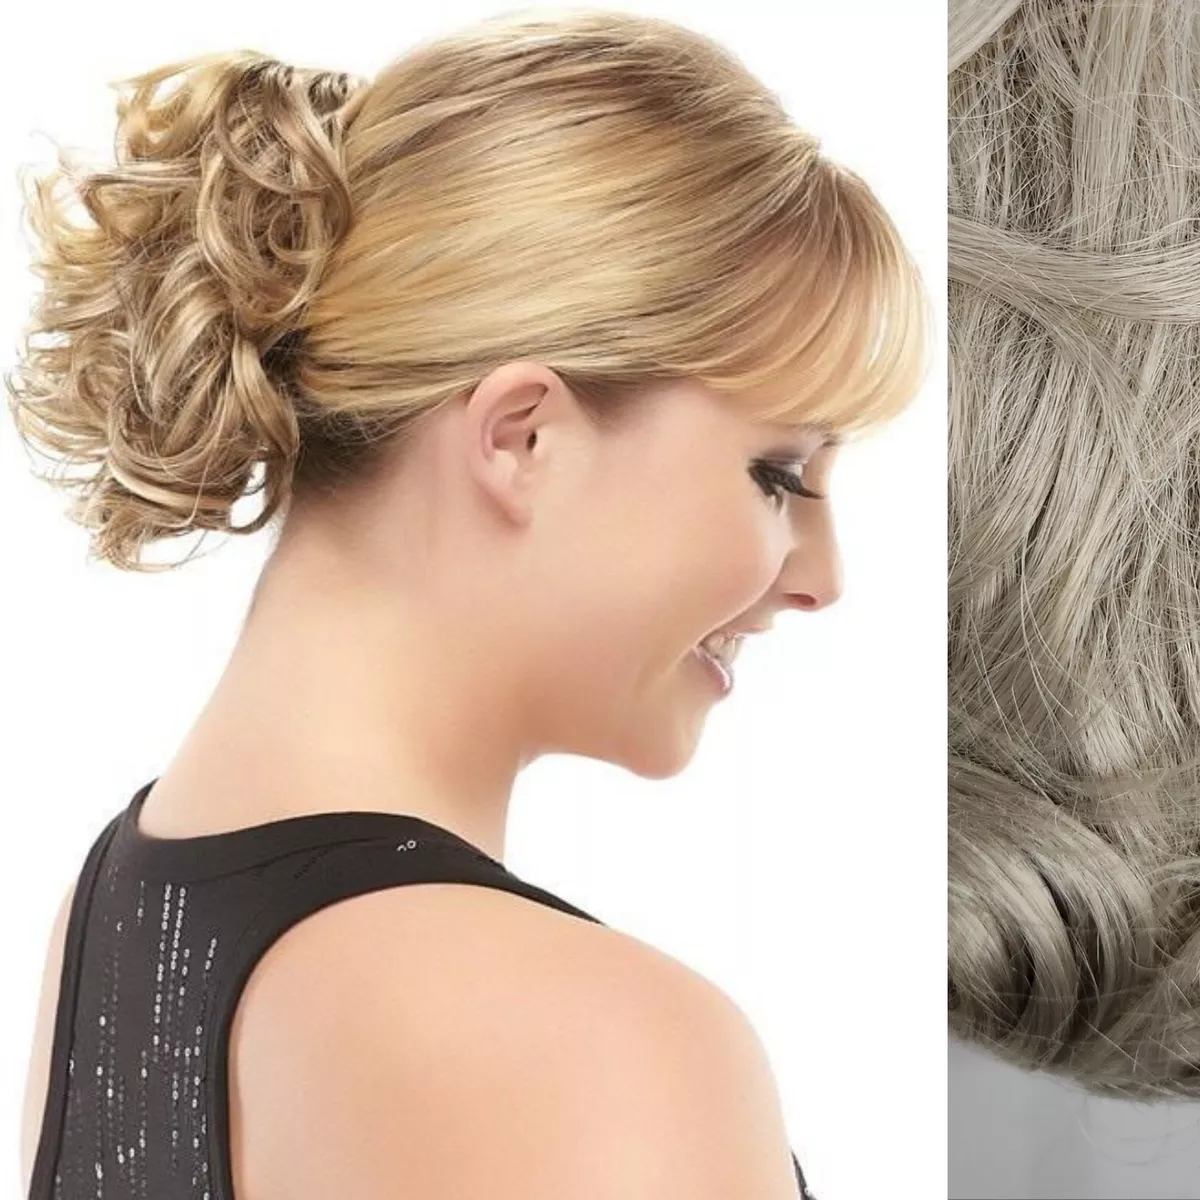 10 Best Ways to Rock a Ponytail Bridal Hairstyle - Merry Hook